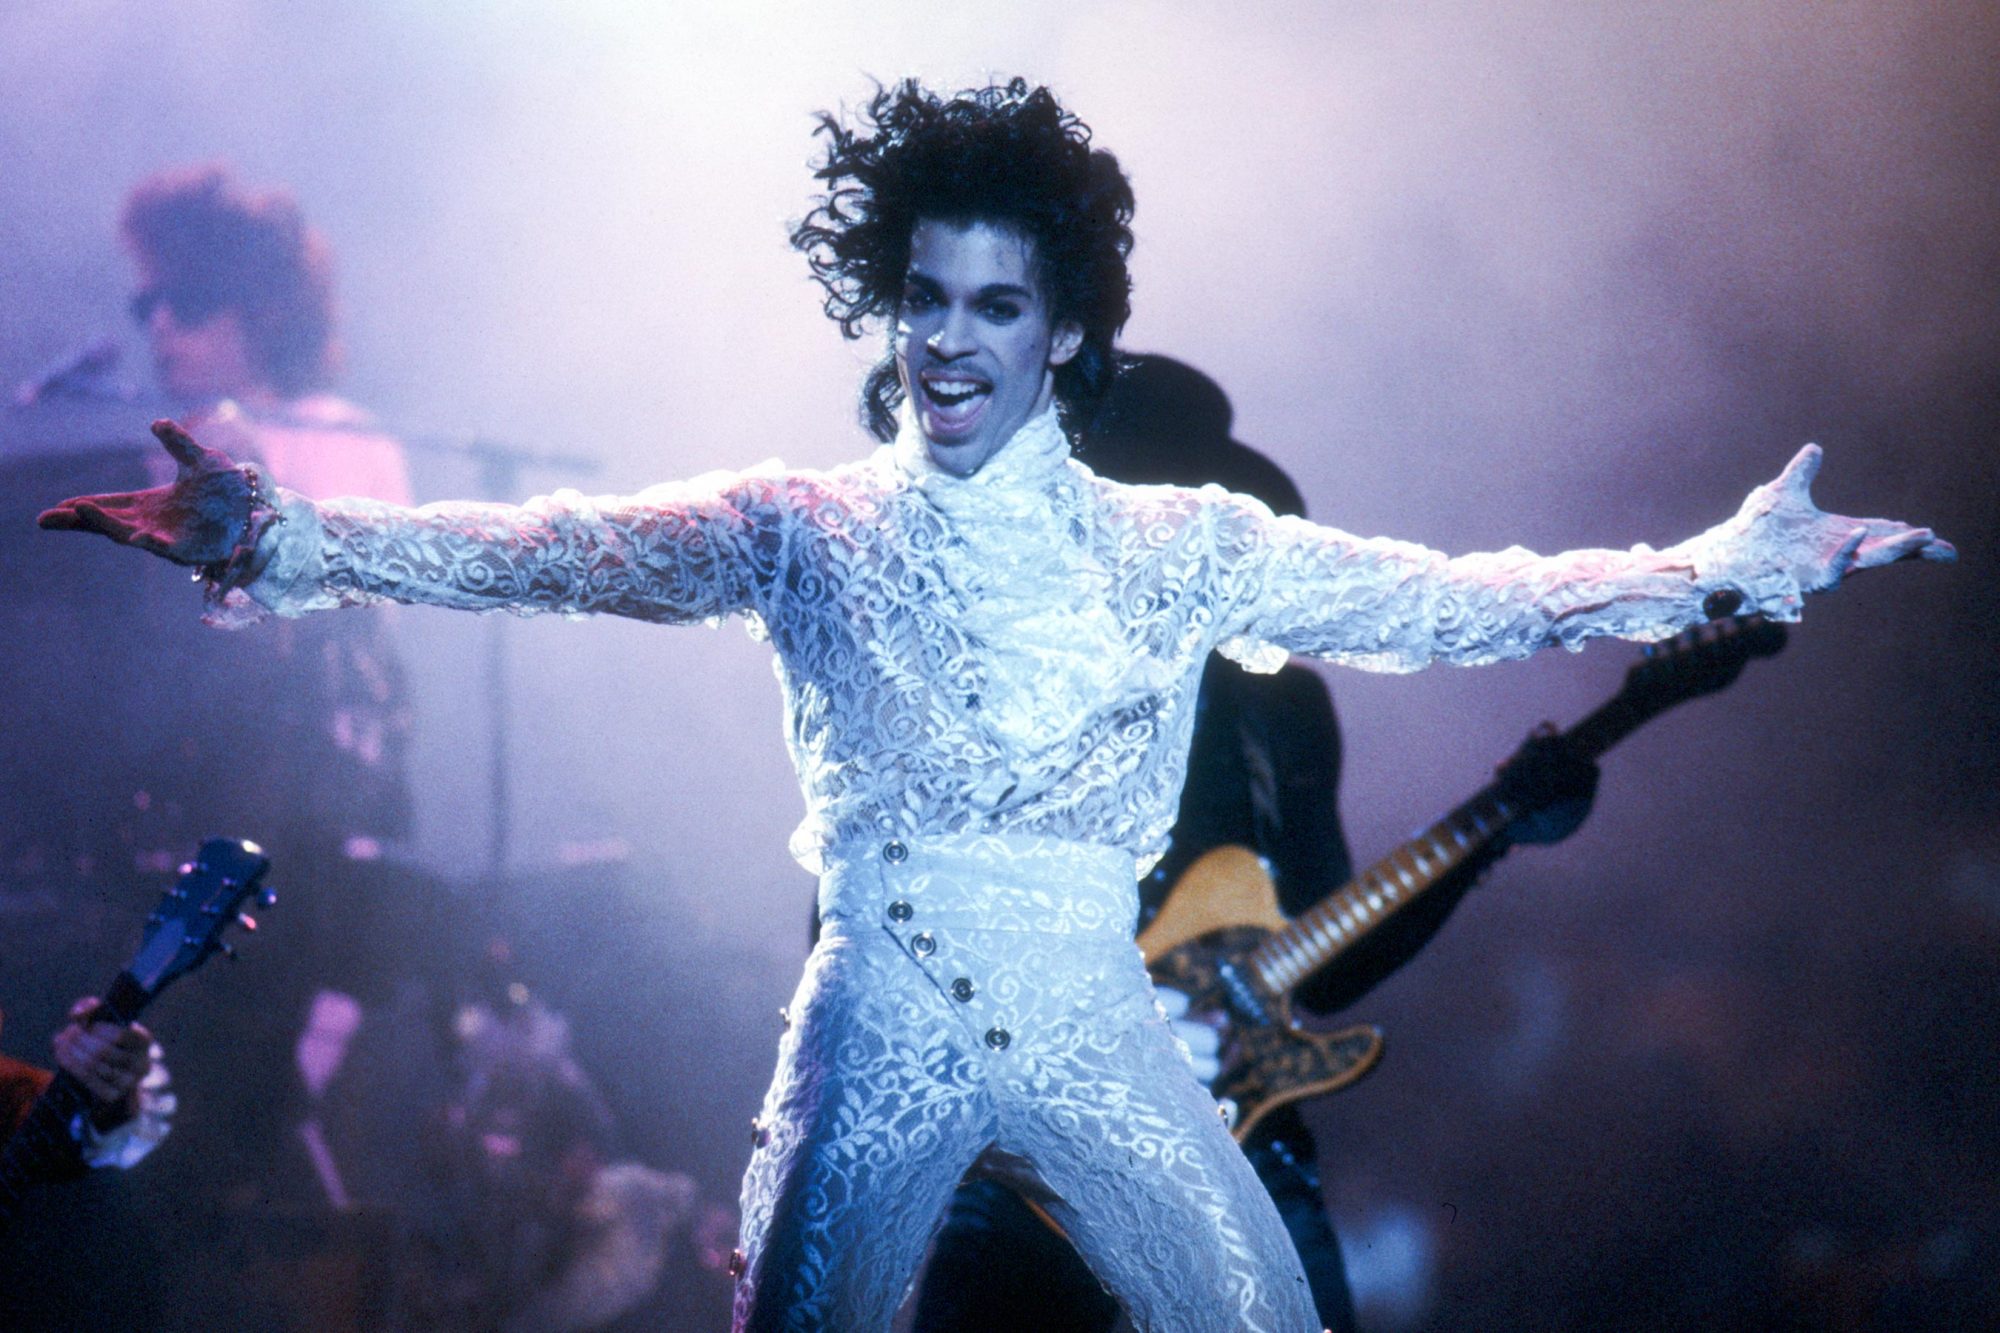 Prince The Music Legend Married Twice Before His Death in 2016!